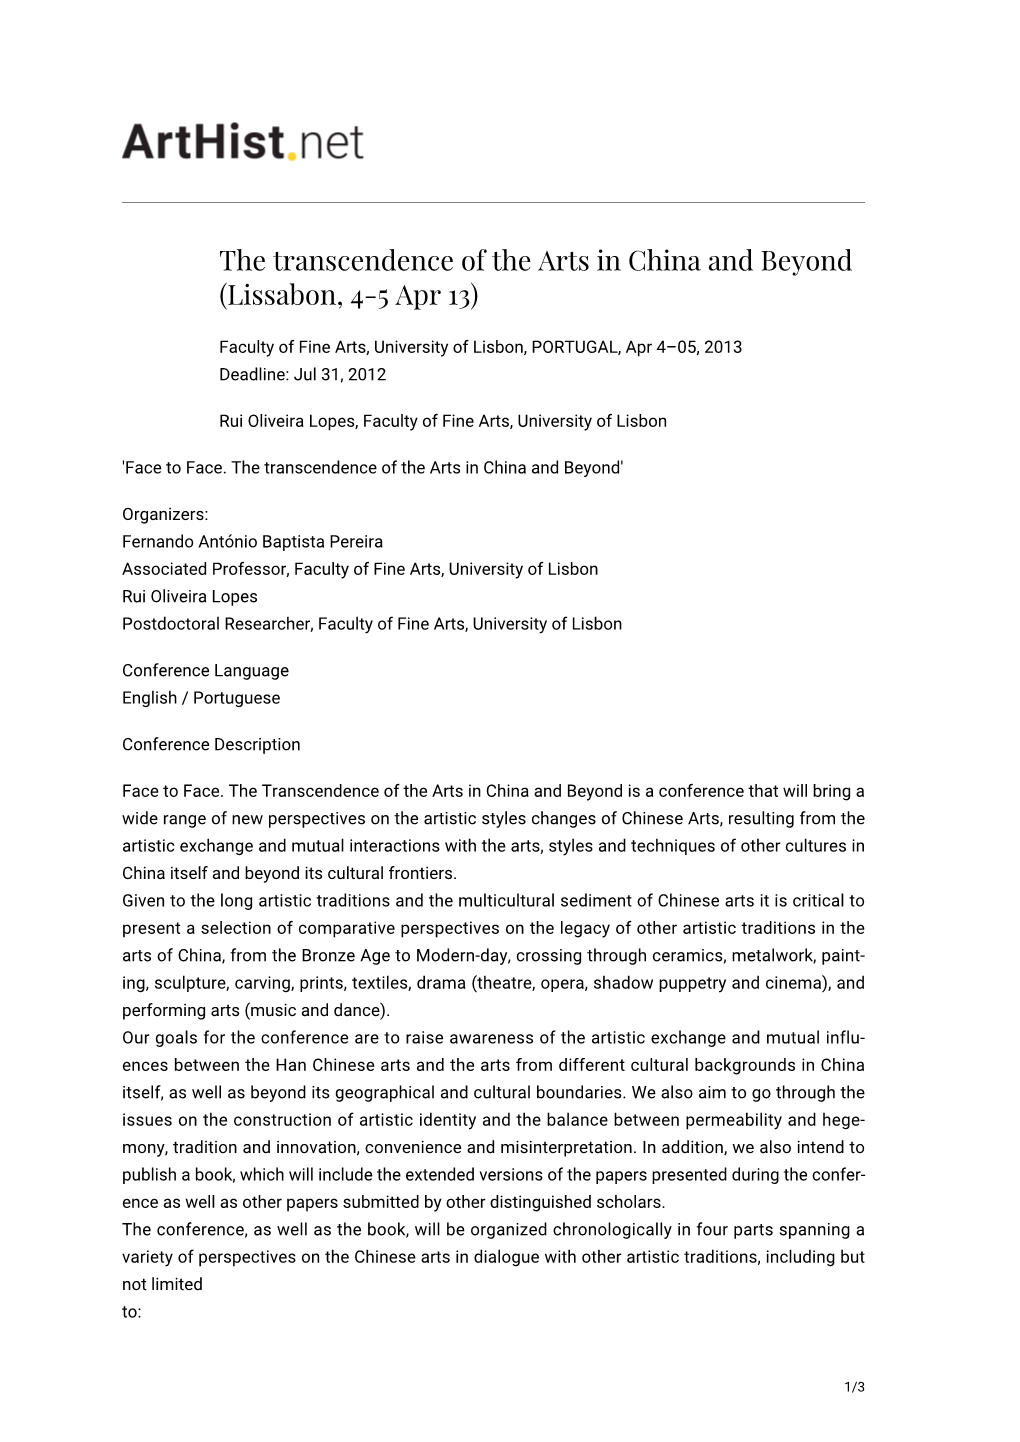 The Transcendence of the Arts in China and Beyond (Lissabon, 4-5 Apr 13)